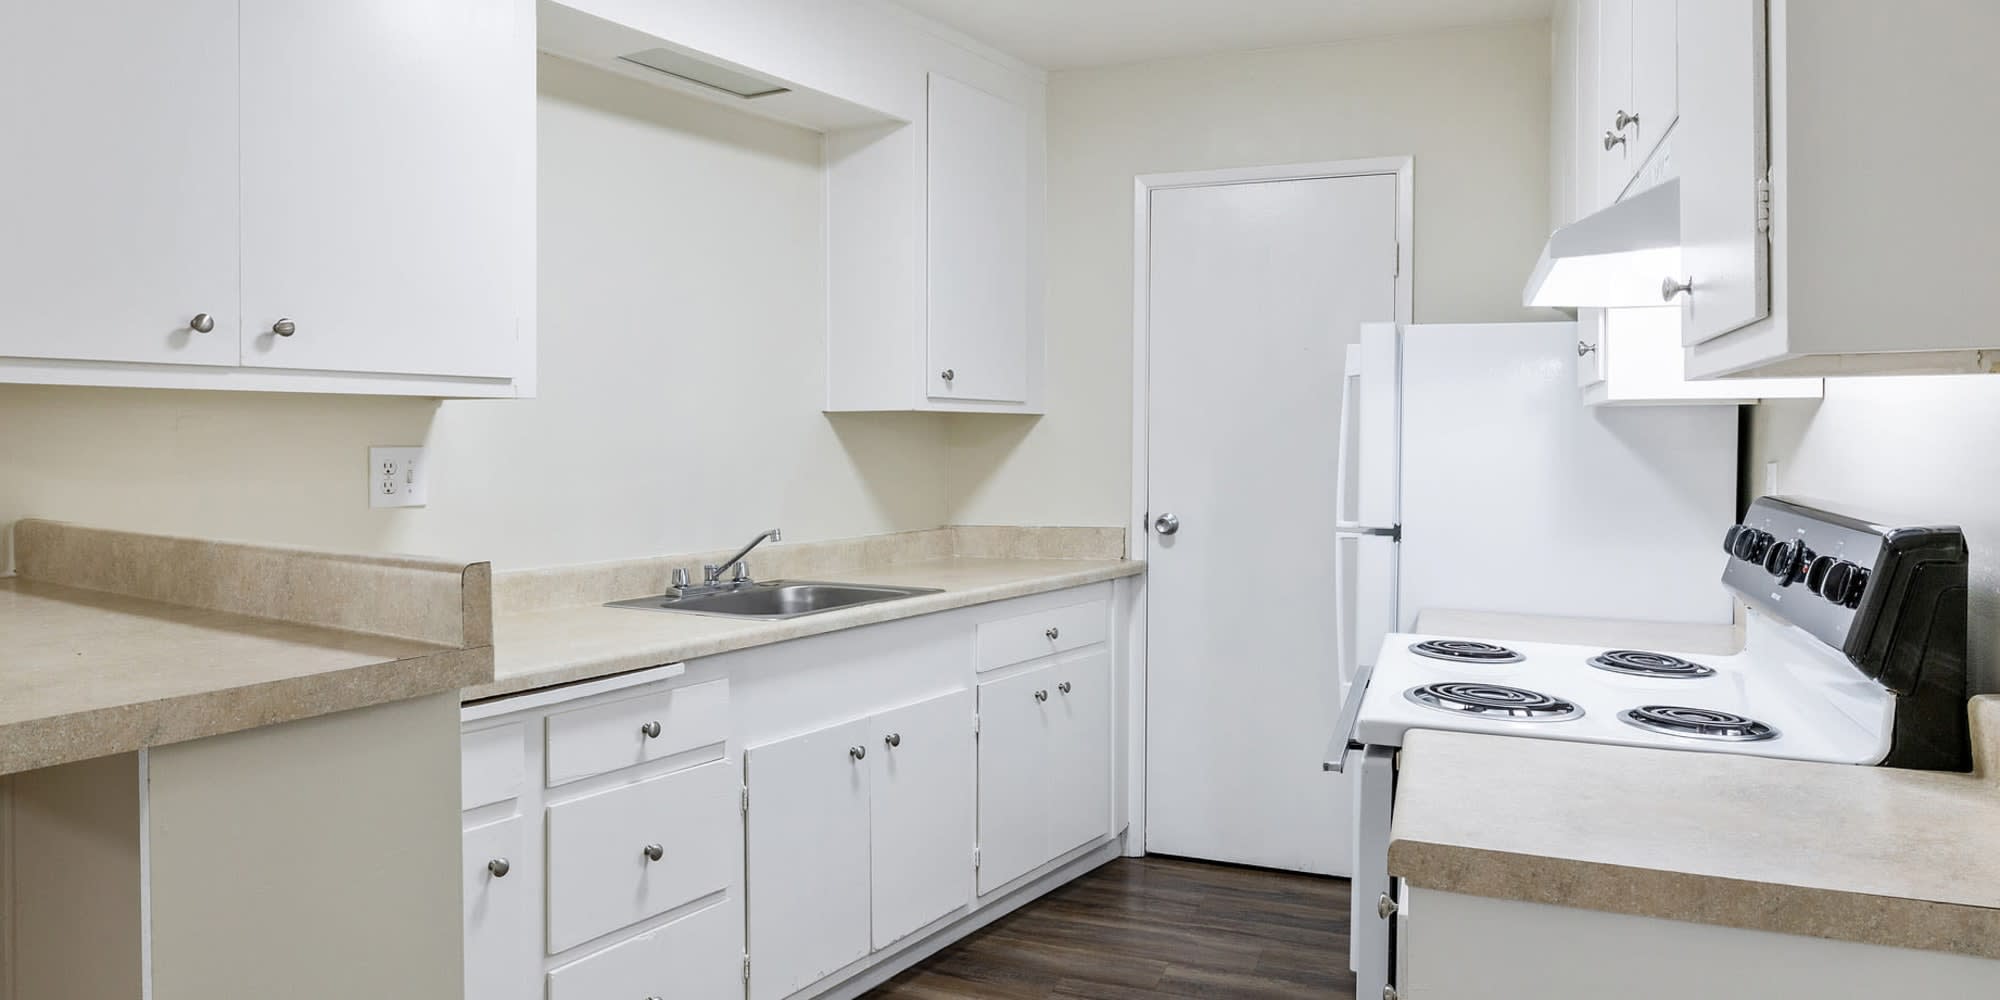 Kitchen with all the amenities at Coronado Apartments in Fremont, California